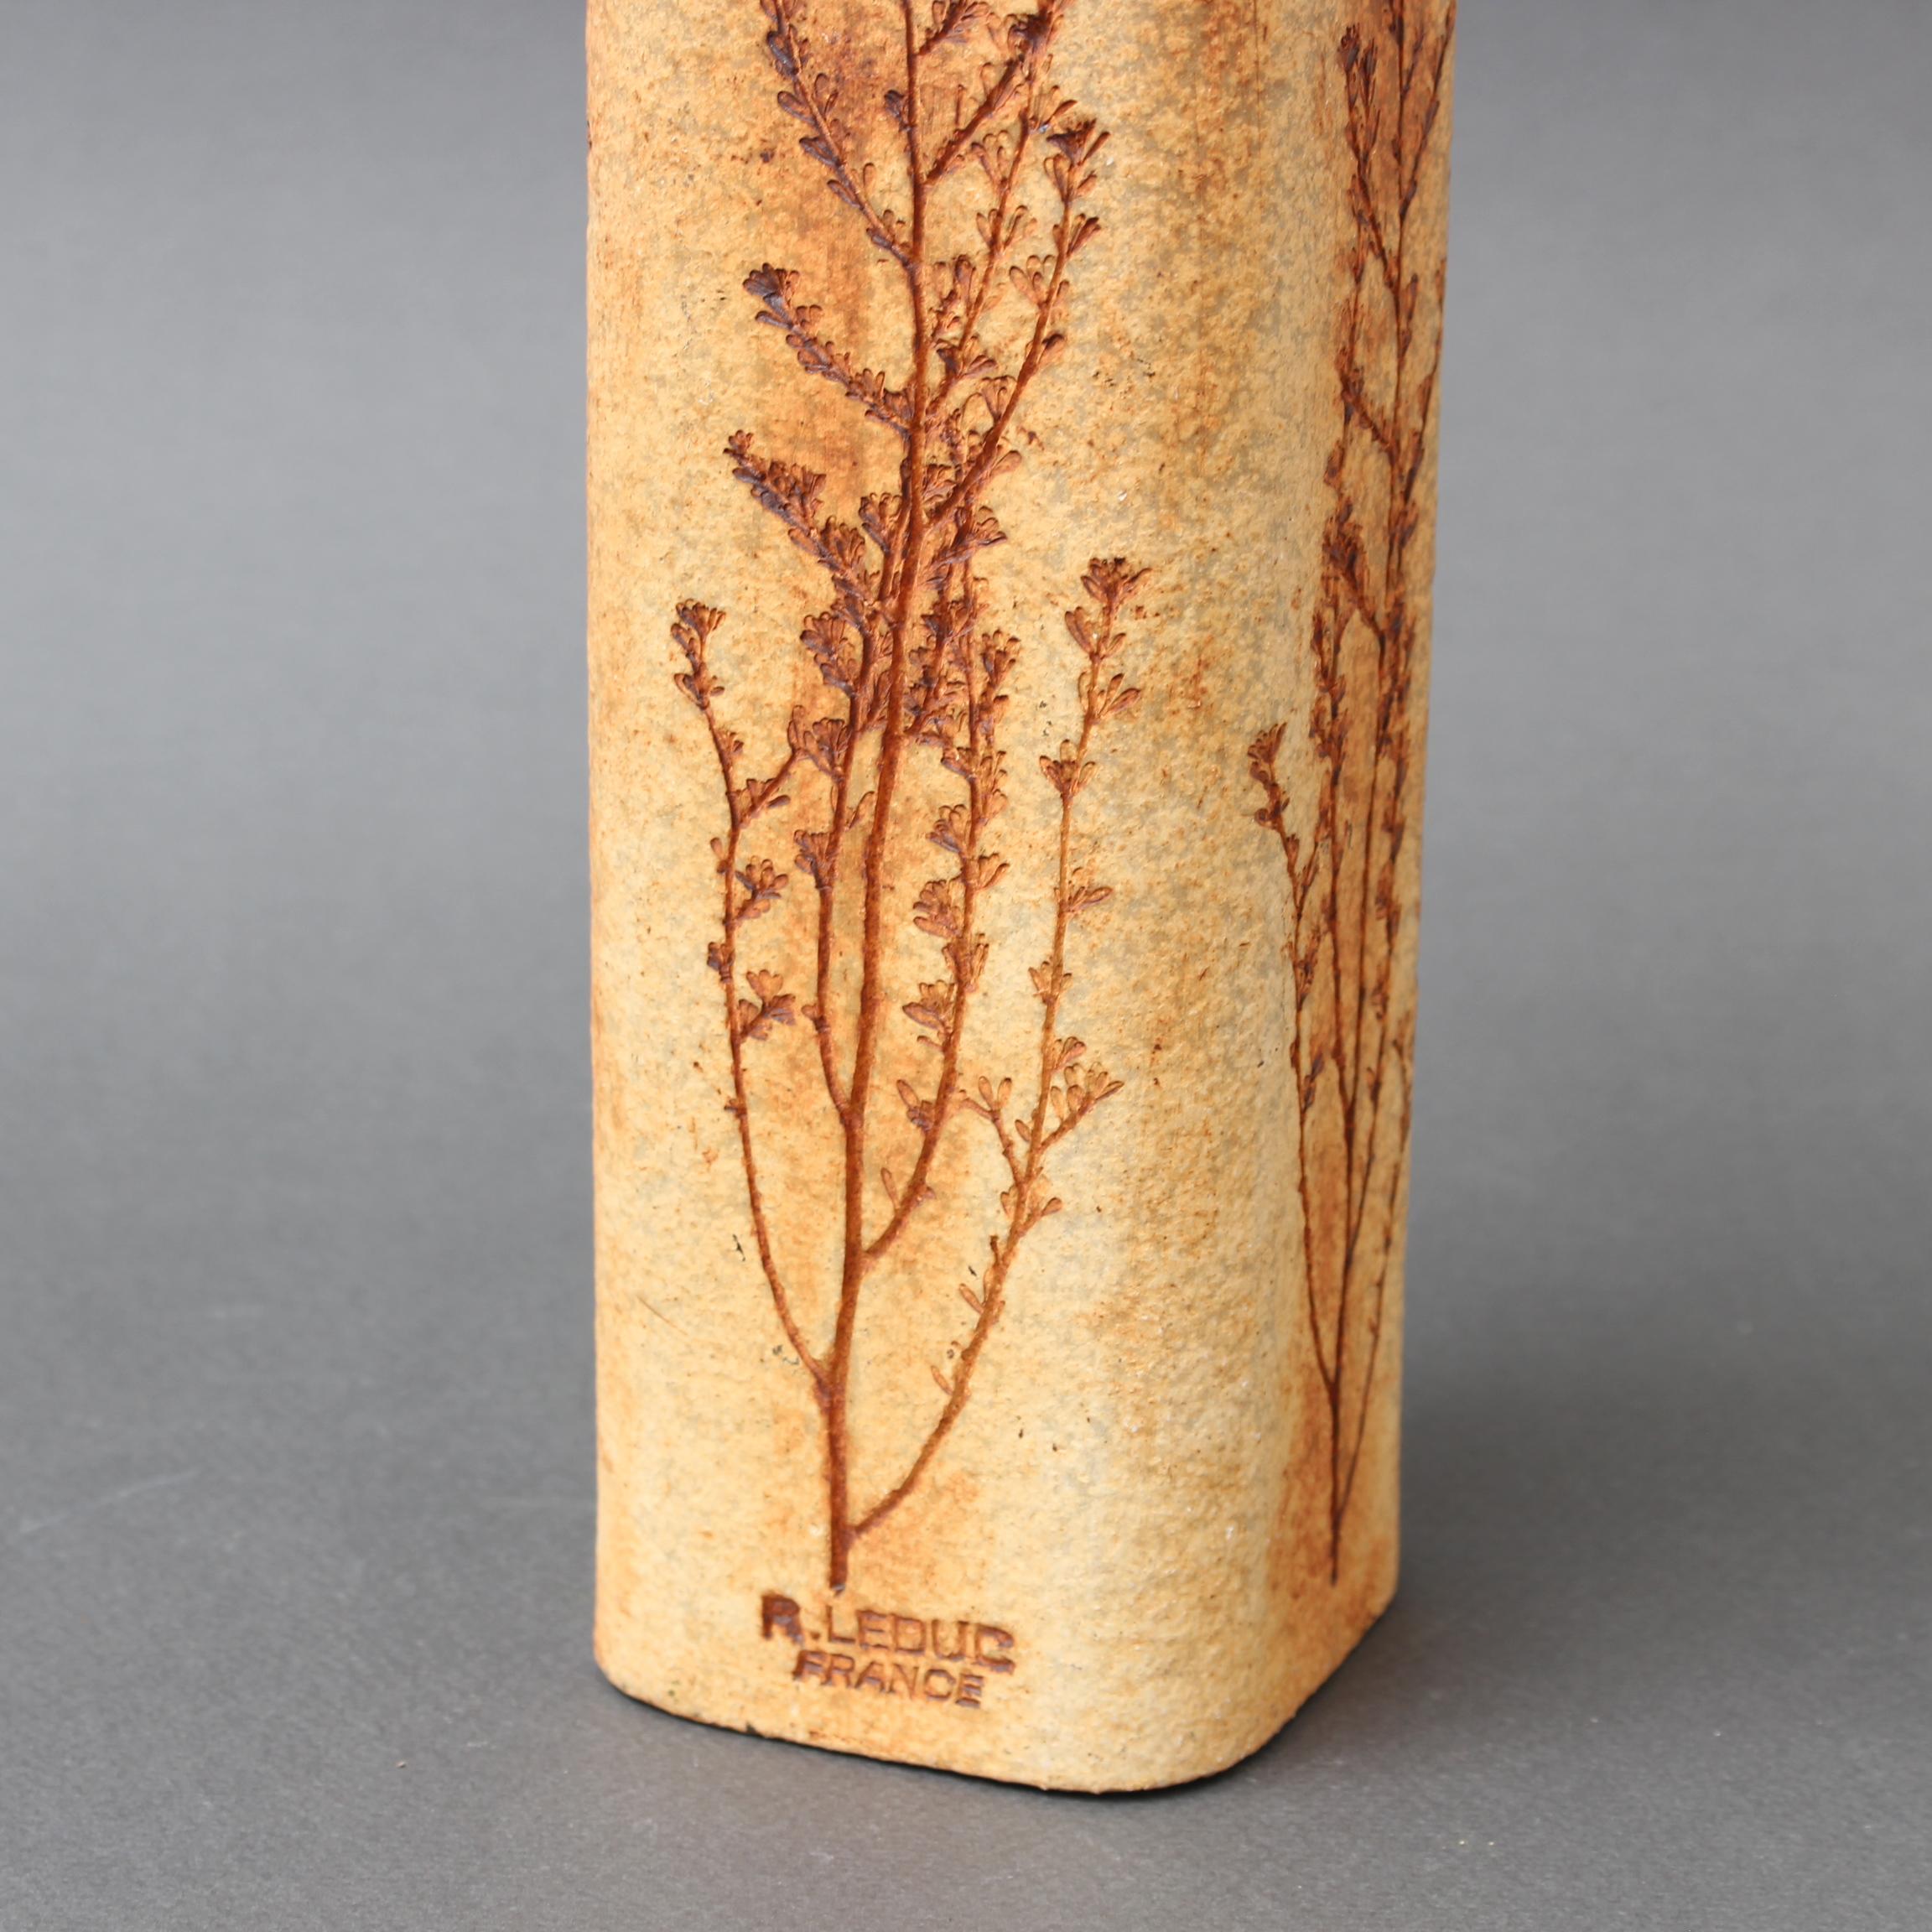 Vintage French Ceramic Vase with Plant Motif by Raymonde Leduc (circa 1960s) For Sale 6